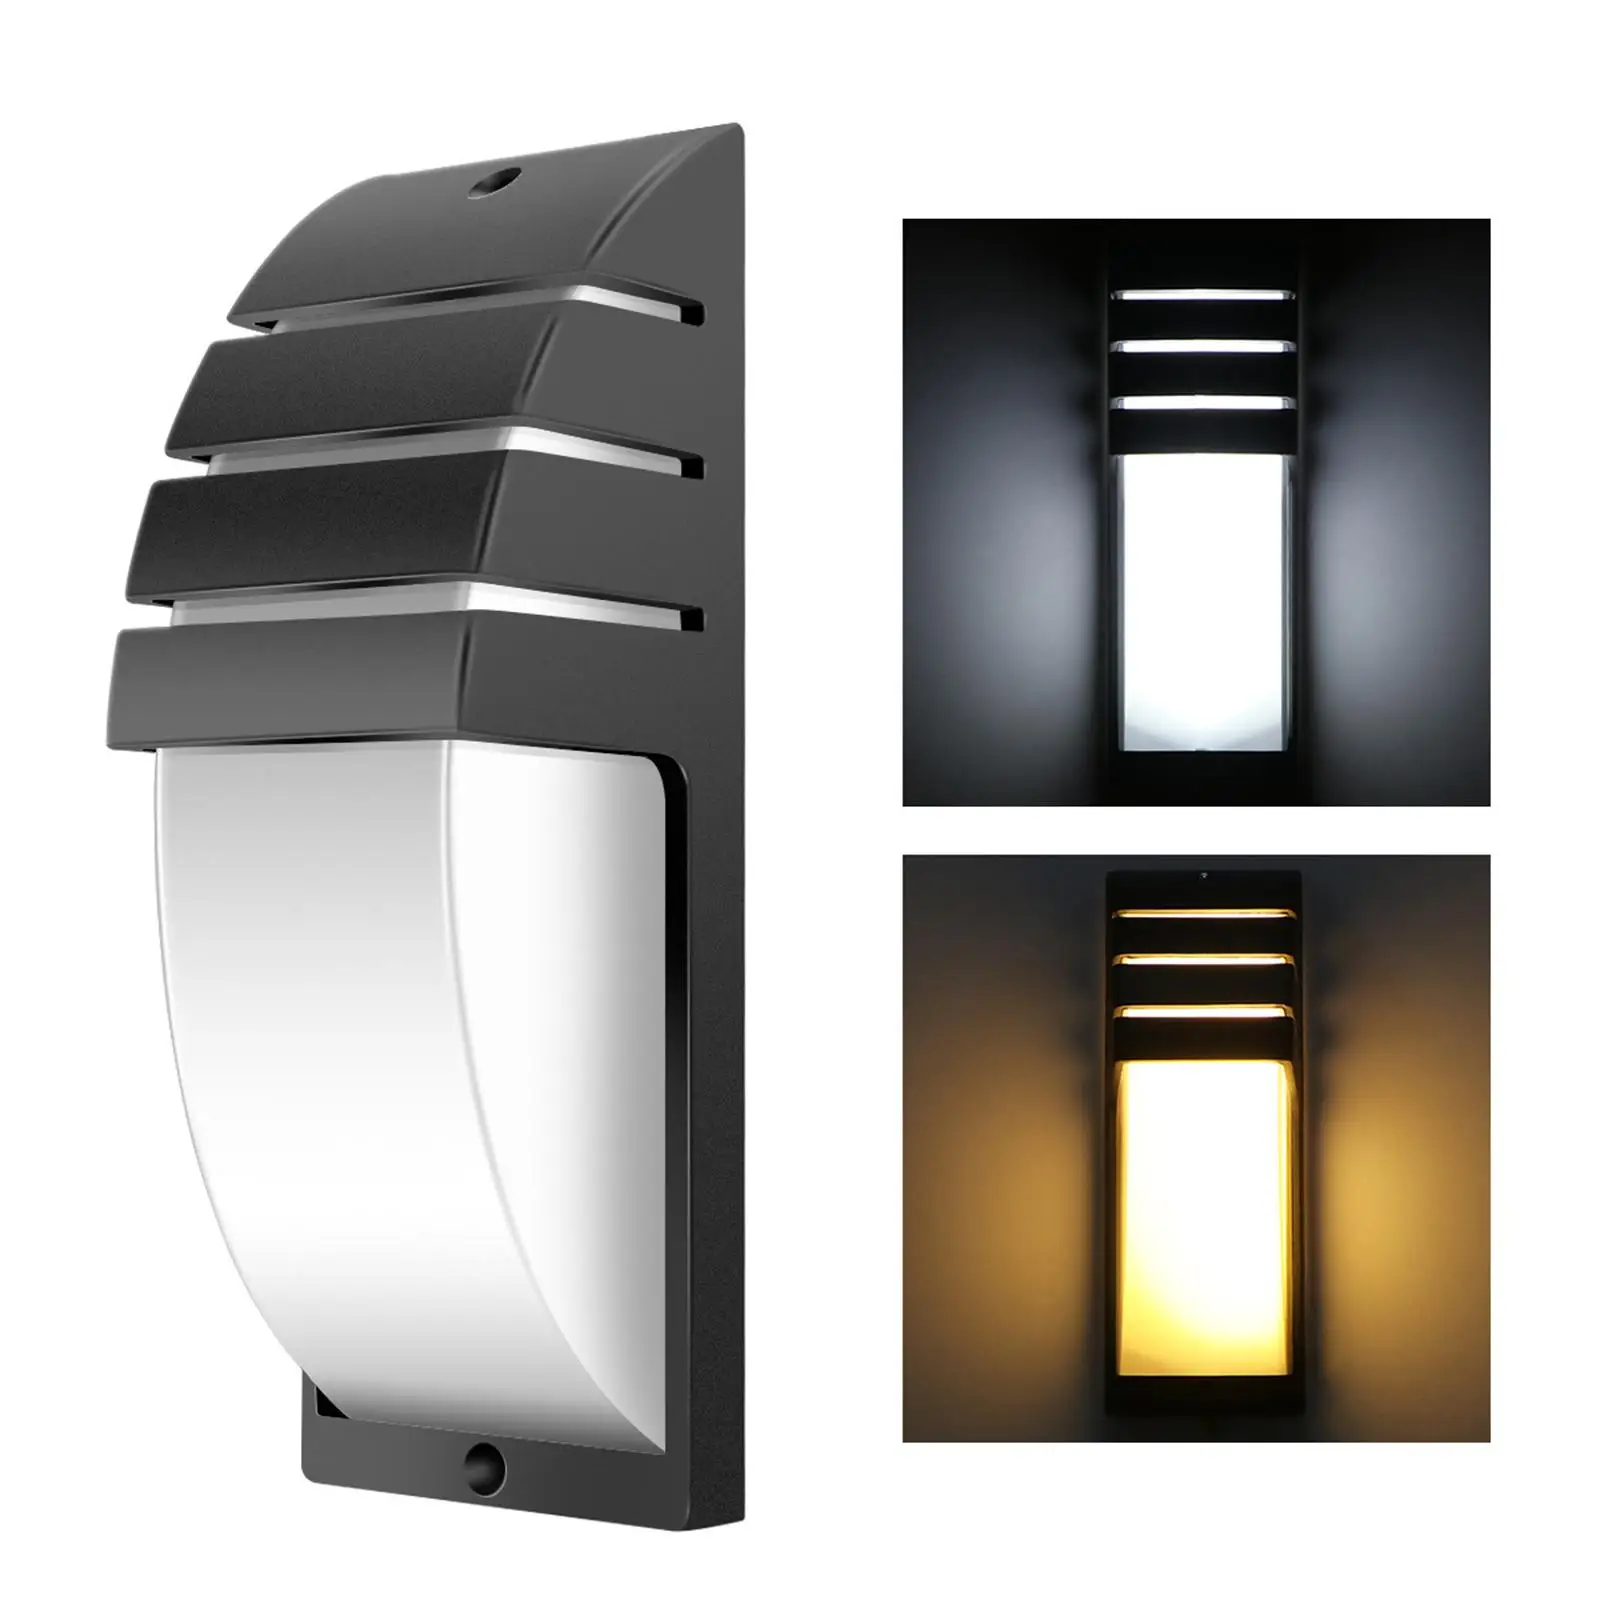 Outdoor Wall Light IP65 Waterproof Exterior Light Porch Light Body in Aluminum Wall Mount Lamp LED Wall Sconce for Hallway Porch